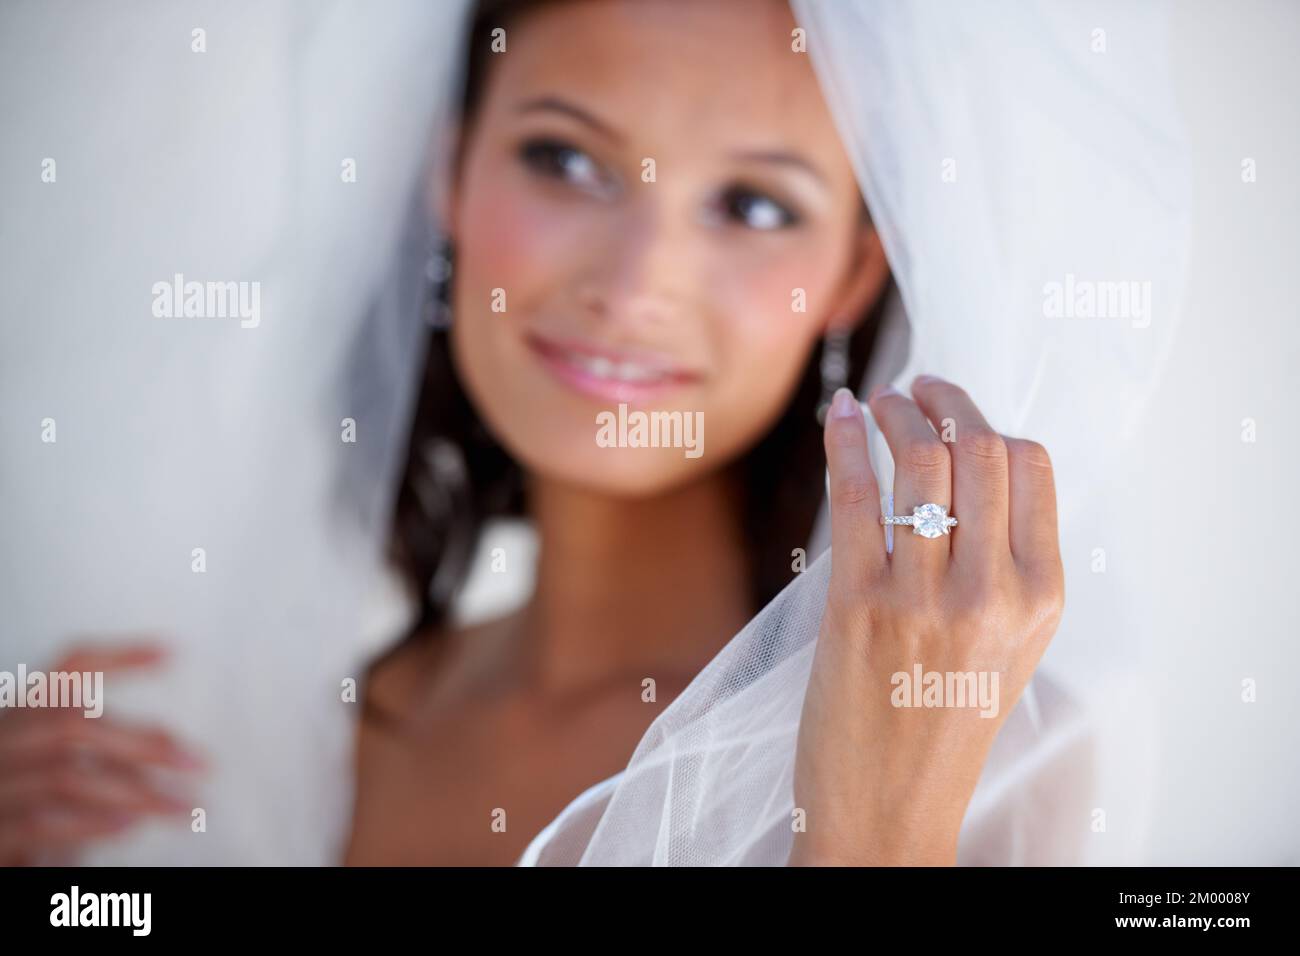 Wedded bliss. A gorgeous young bride showing off her wedding ring. Stock Photo